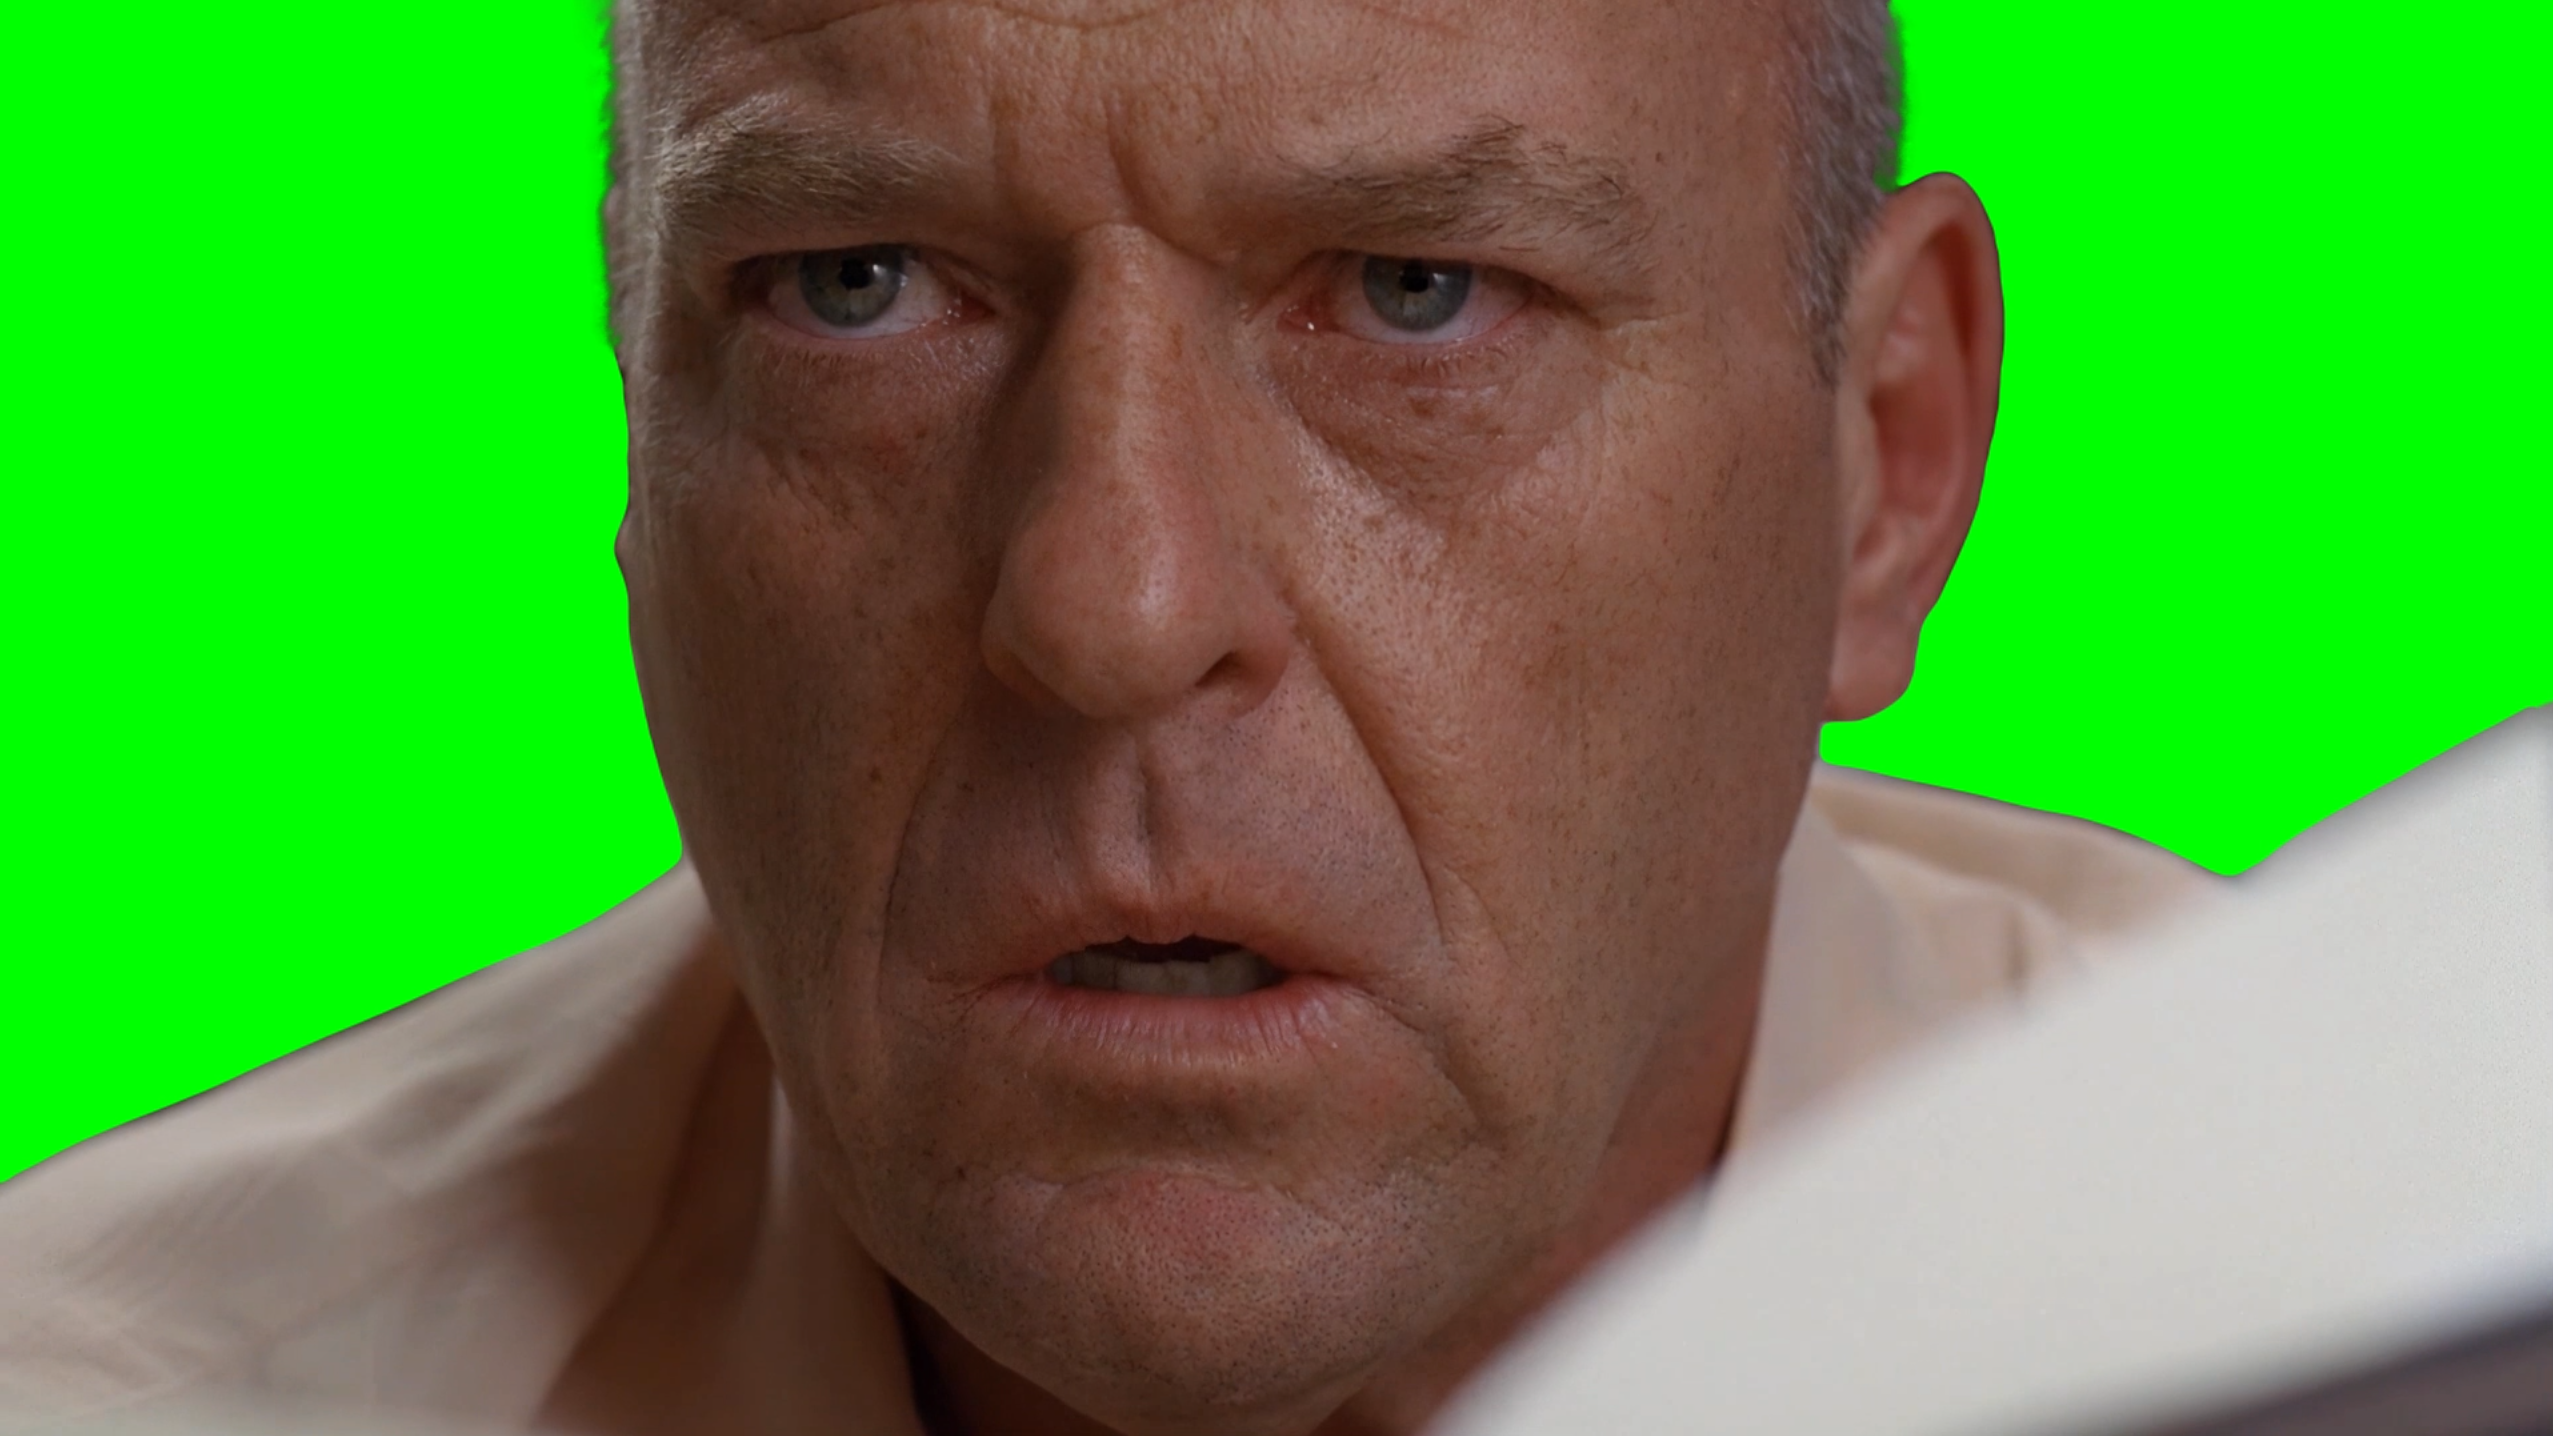 Hank Schrader reading a book in the toilet - Breaking Bad meme (Green Screen)